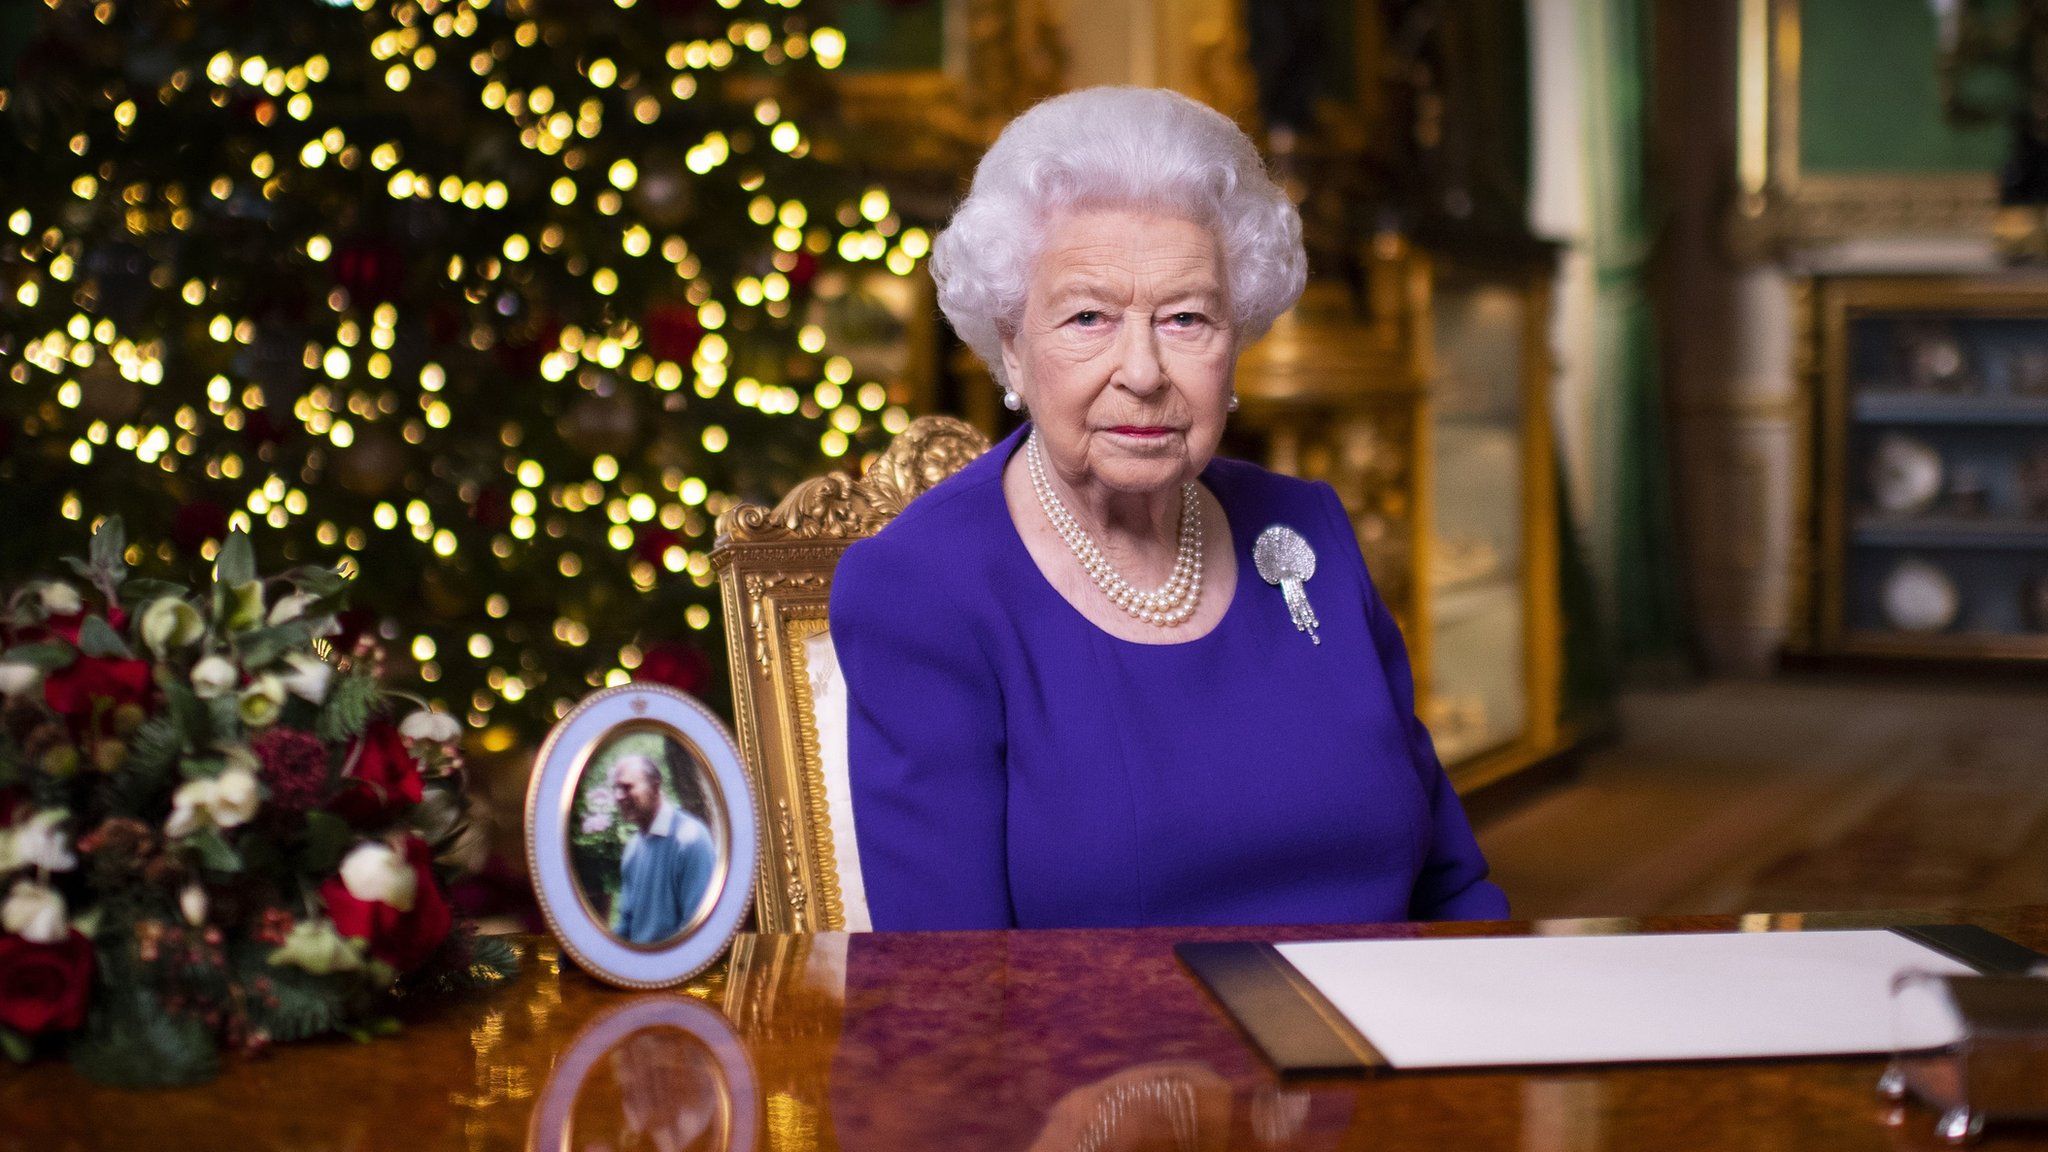 The Queen pictured at Windsor Castle in mid-December 2020